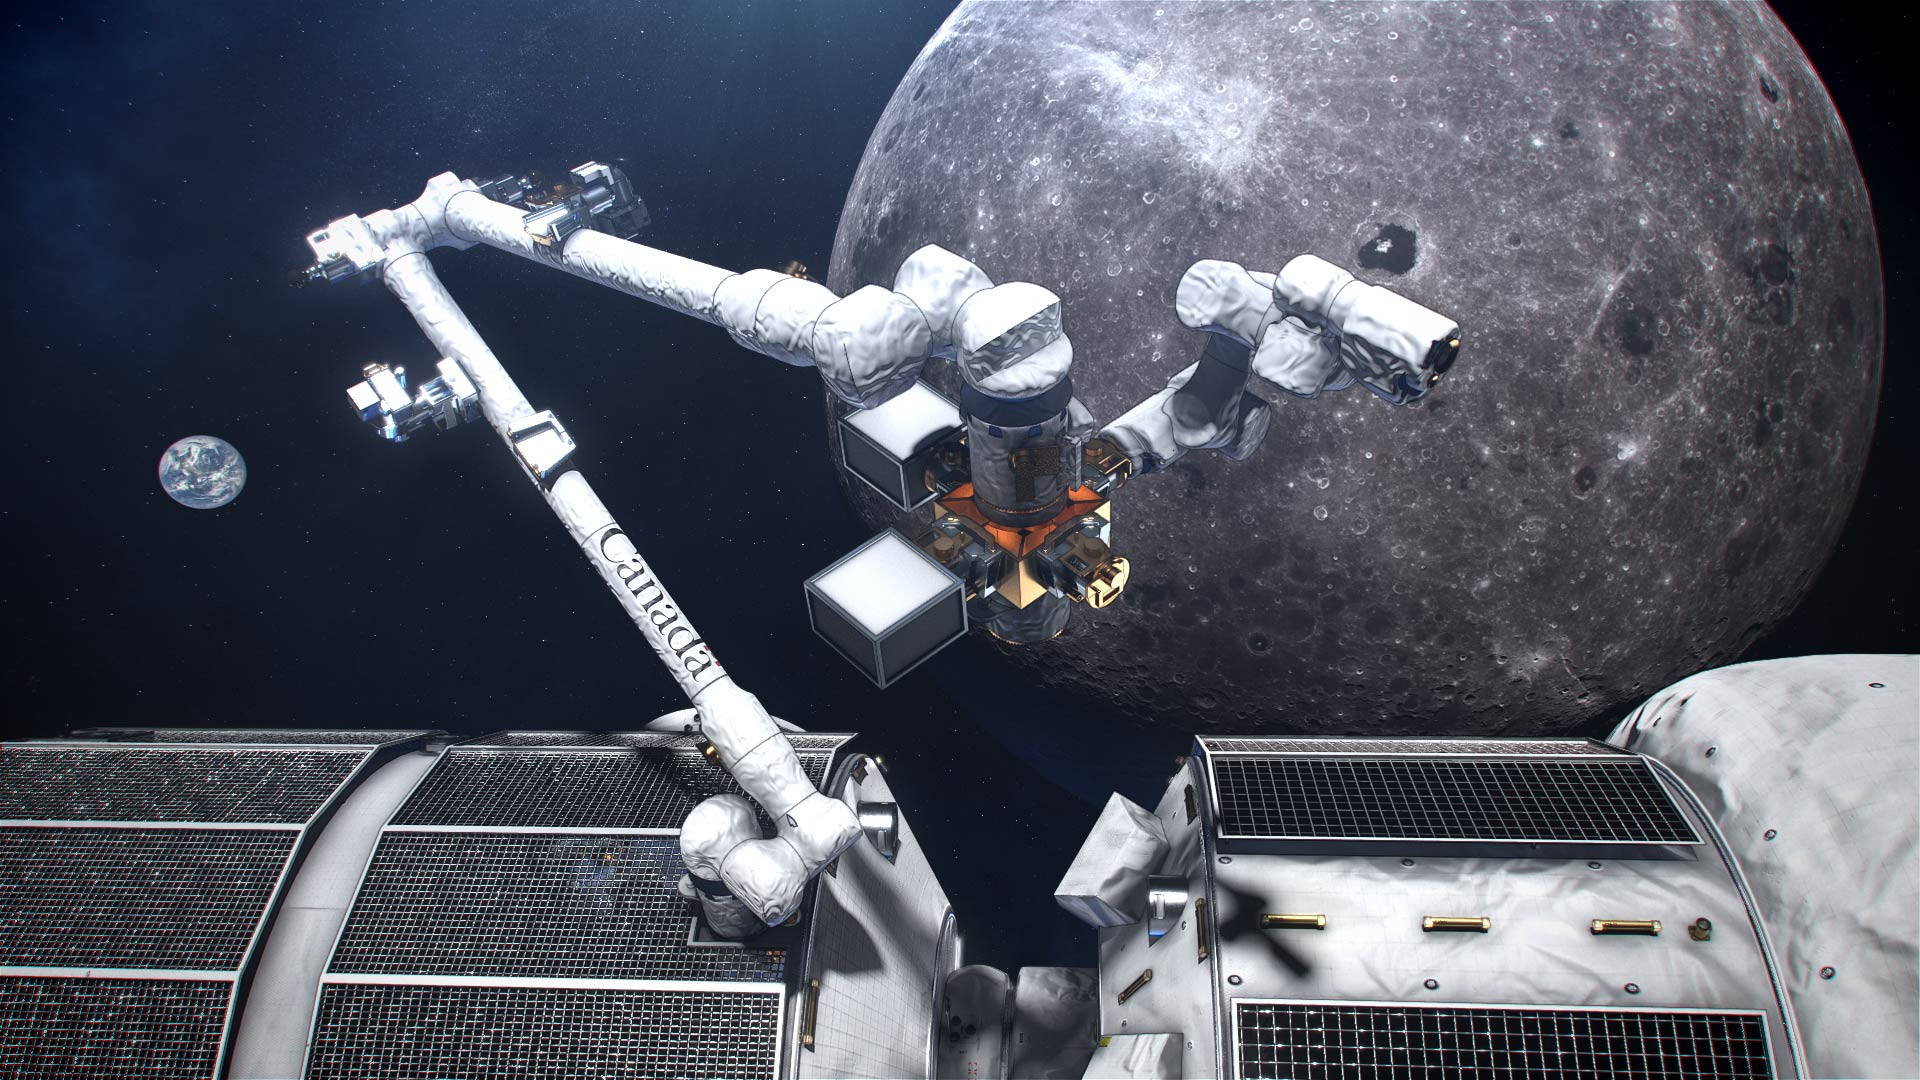 An artist's concept of Canadarm3, Canada's smart robotic system, located on the exterior of the Gateway, a small space station in orbit around the Moon. (Credits: Canadian Space Agency, NASA)